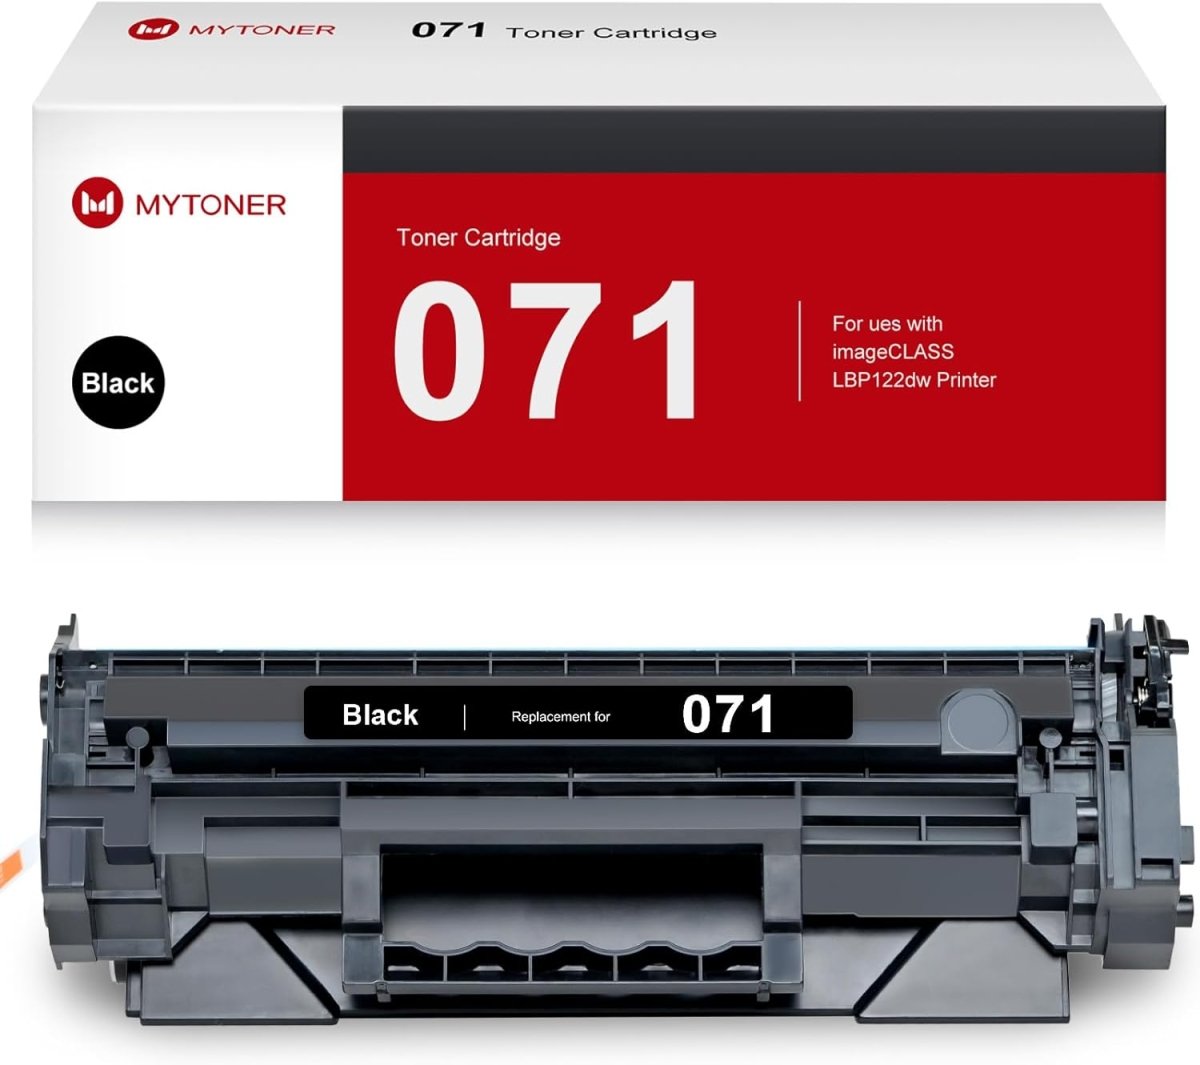 Compatible Canon 071 Black Toner Cartridge - With Chip - Linford Office:Printer Ink & Toner Cartridge